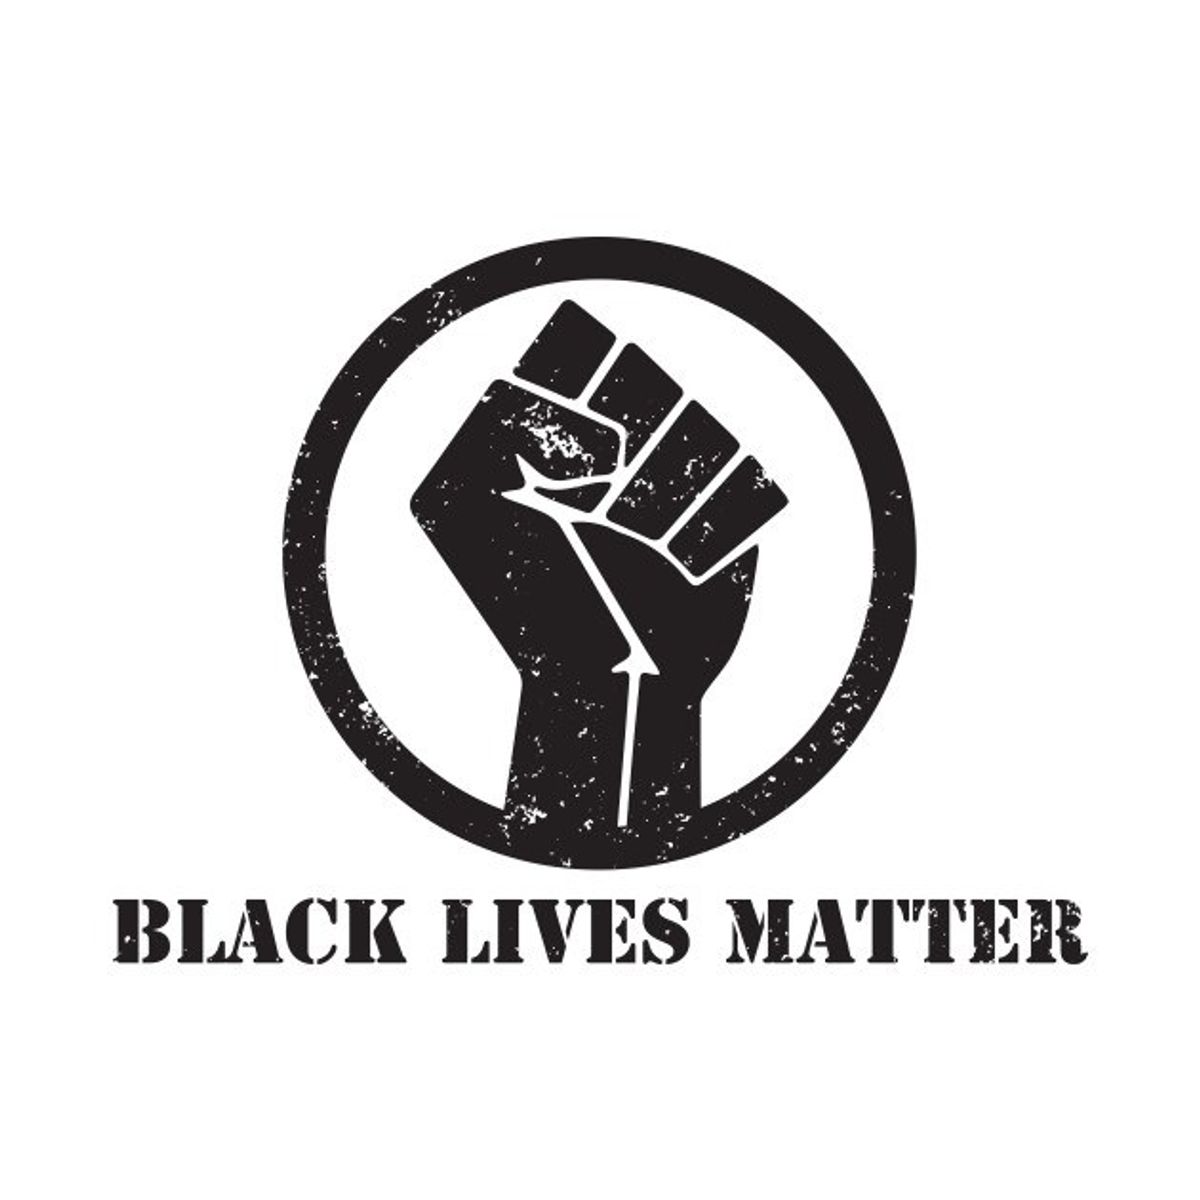 What One White College Girl Thinks About the "Black Lives Matter" Movement